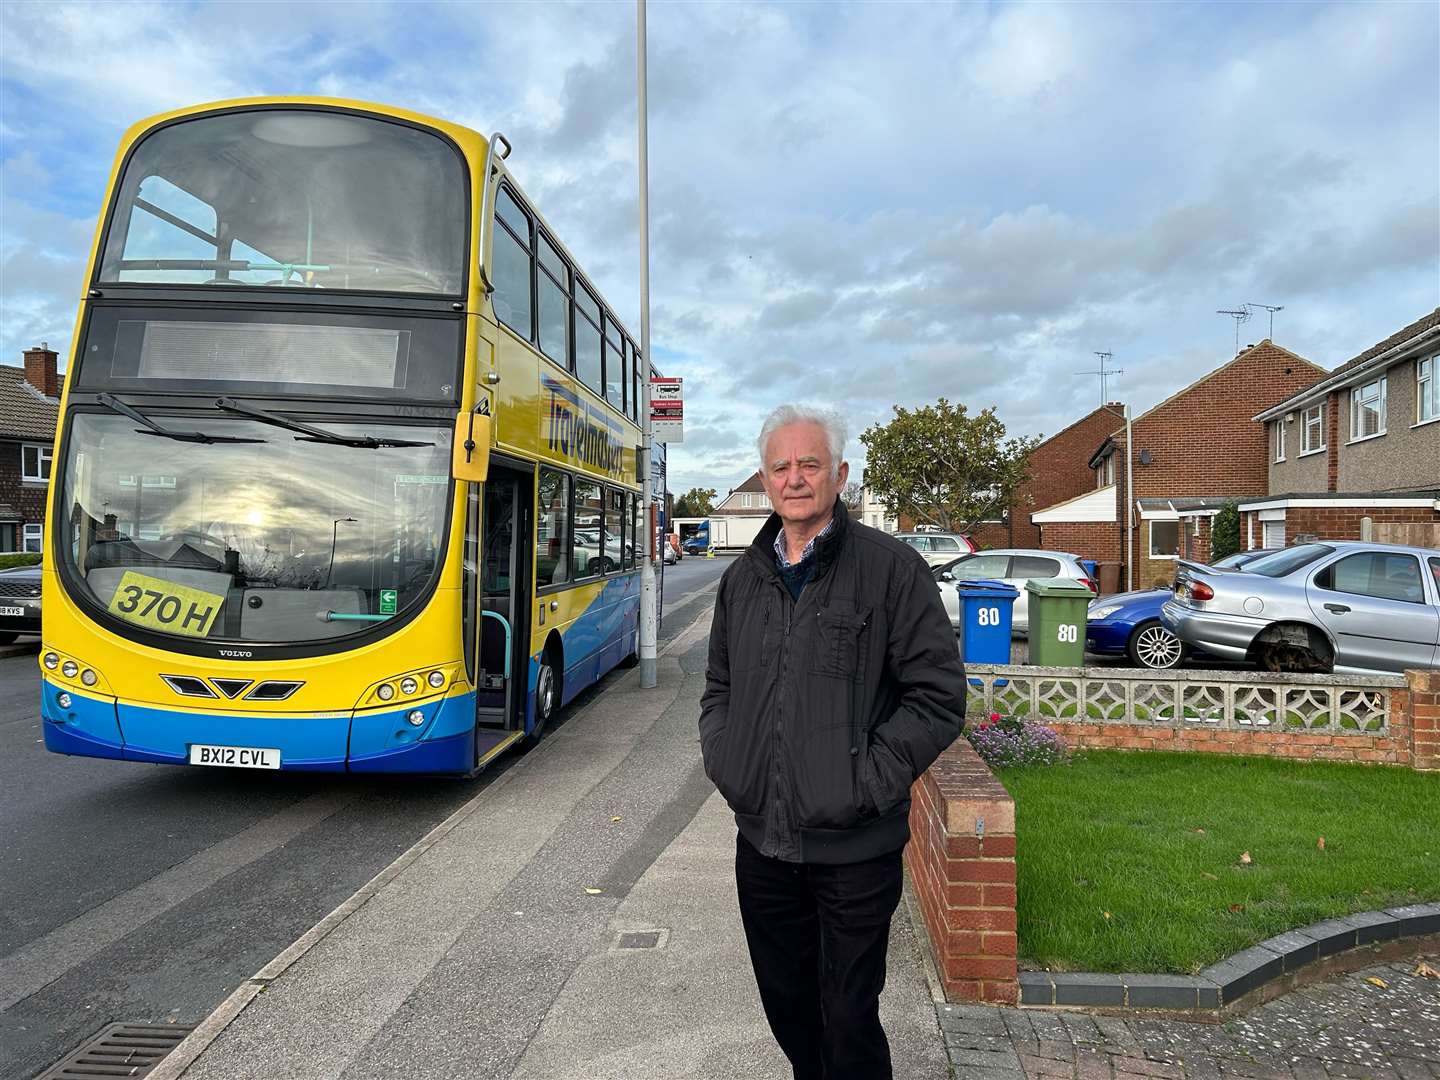 Cllr Roger Truelove standing in front of one of the parked school buses in Sittingbourne's Adelaide Drive